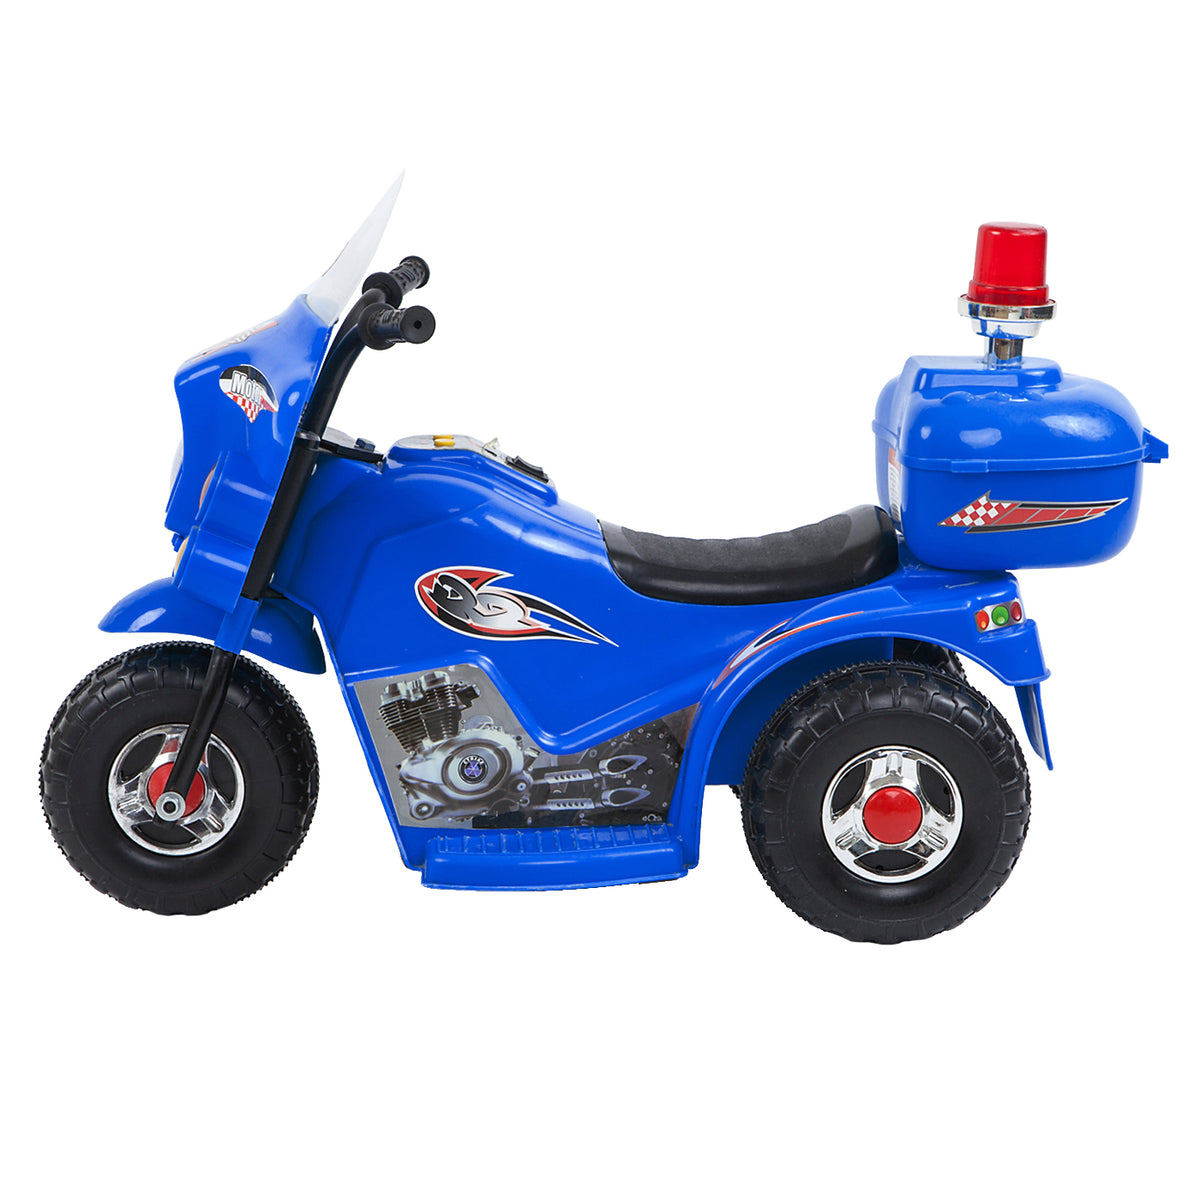 Side view of the blue Children's Electric Ride-on Motorcycle.